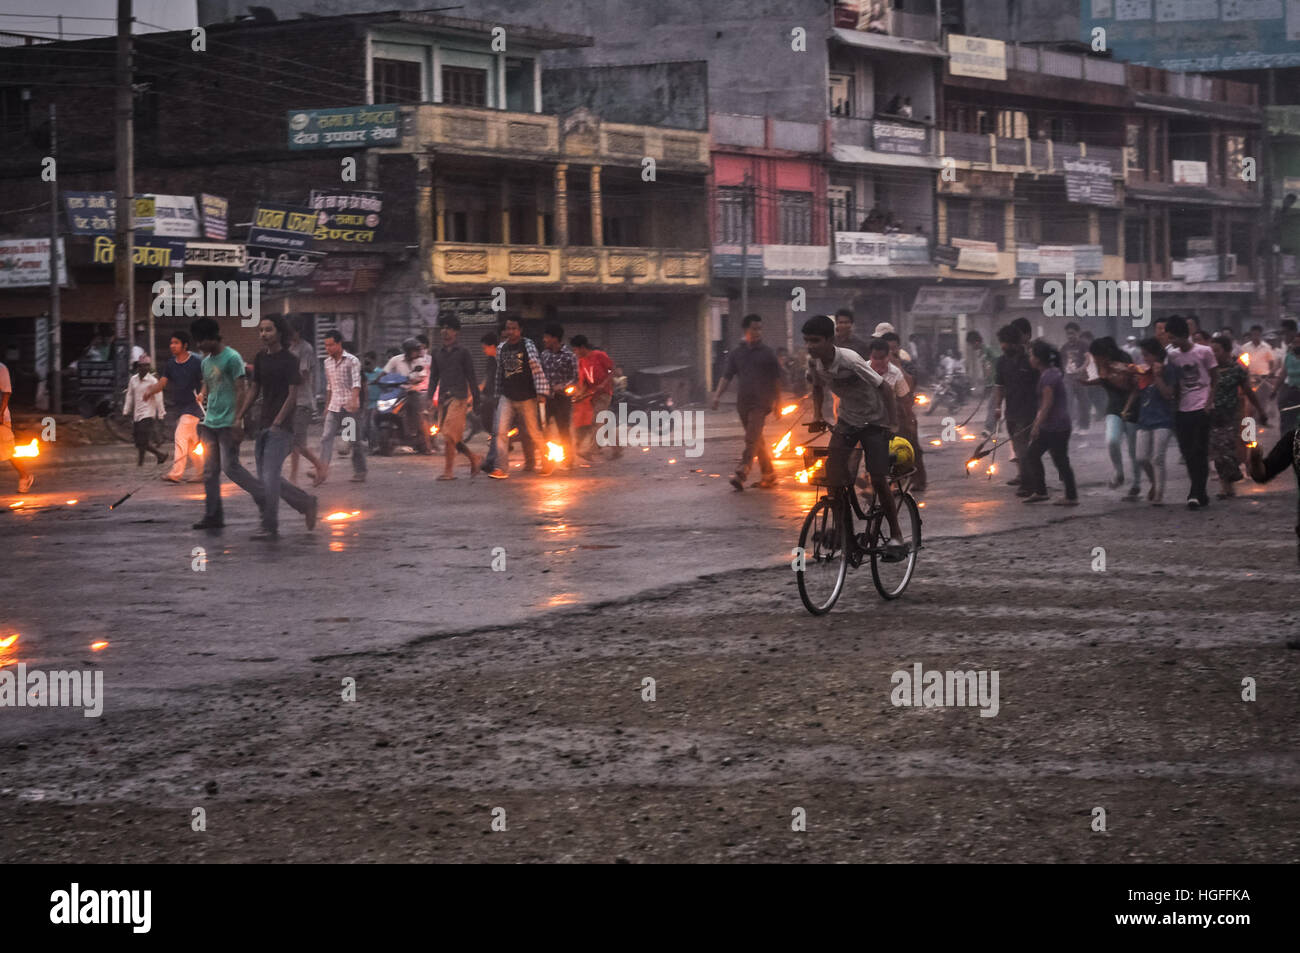 Nepal - circa May 2012: Native people walk or ride bicycles on street and hold burning torches in hands on rainy day during Nepal general strike. Docu Stock Photo